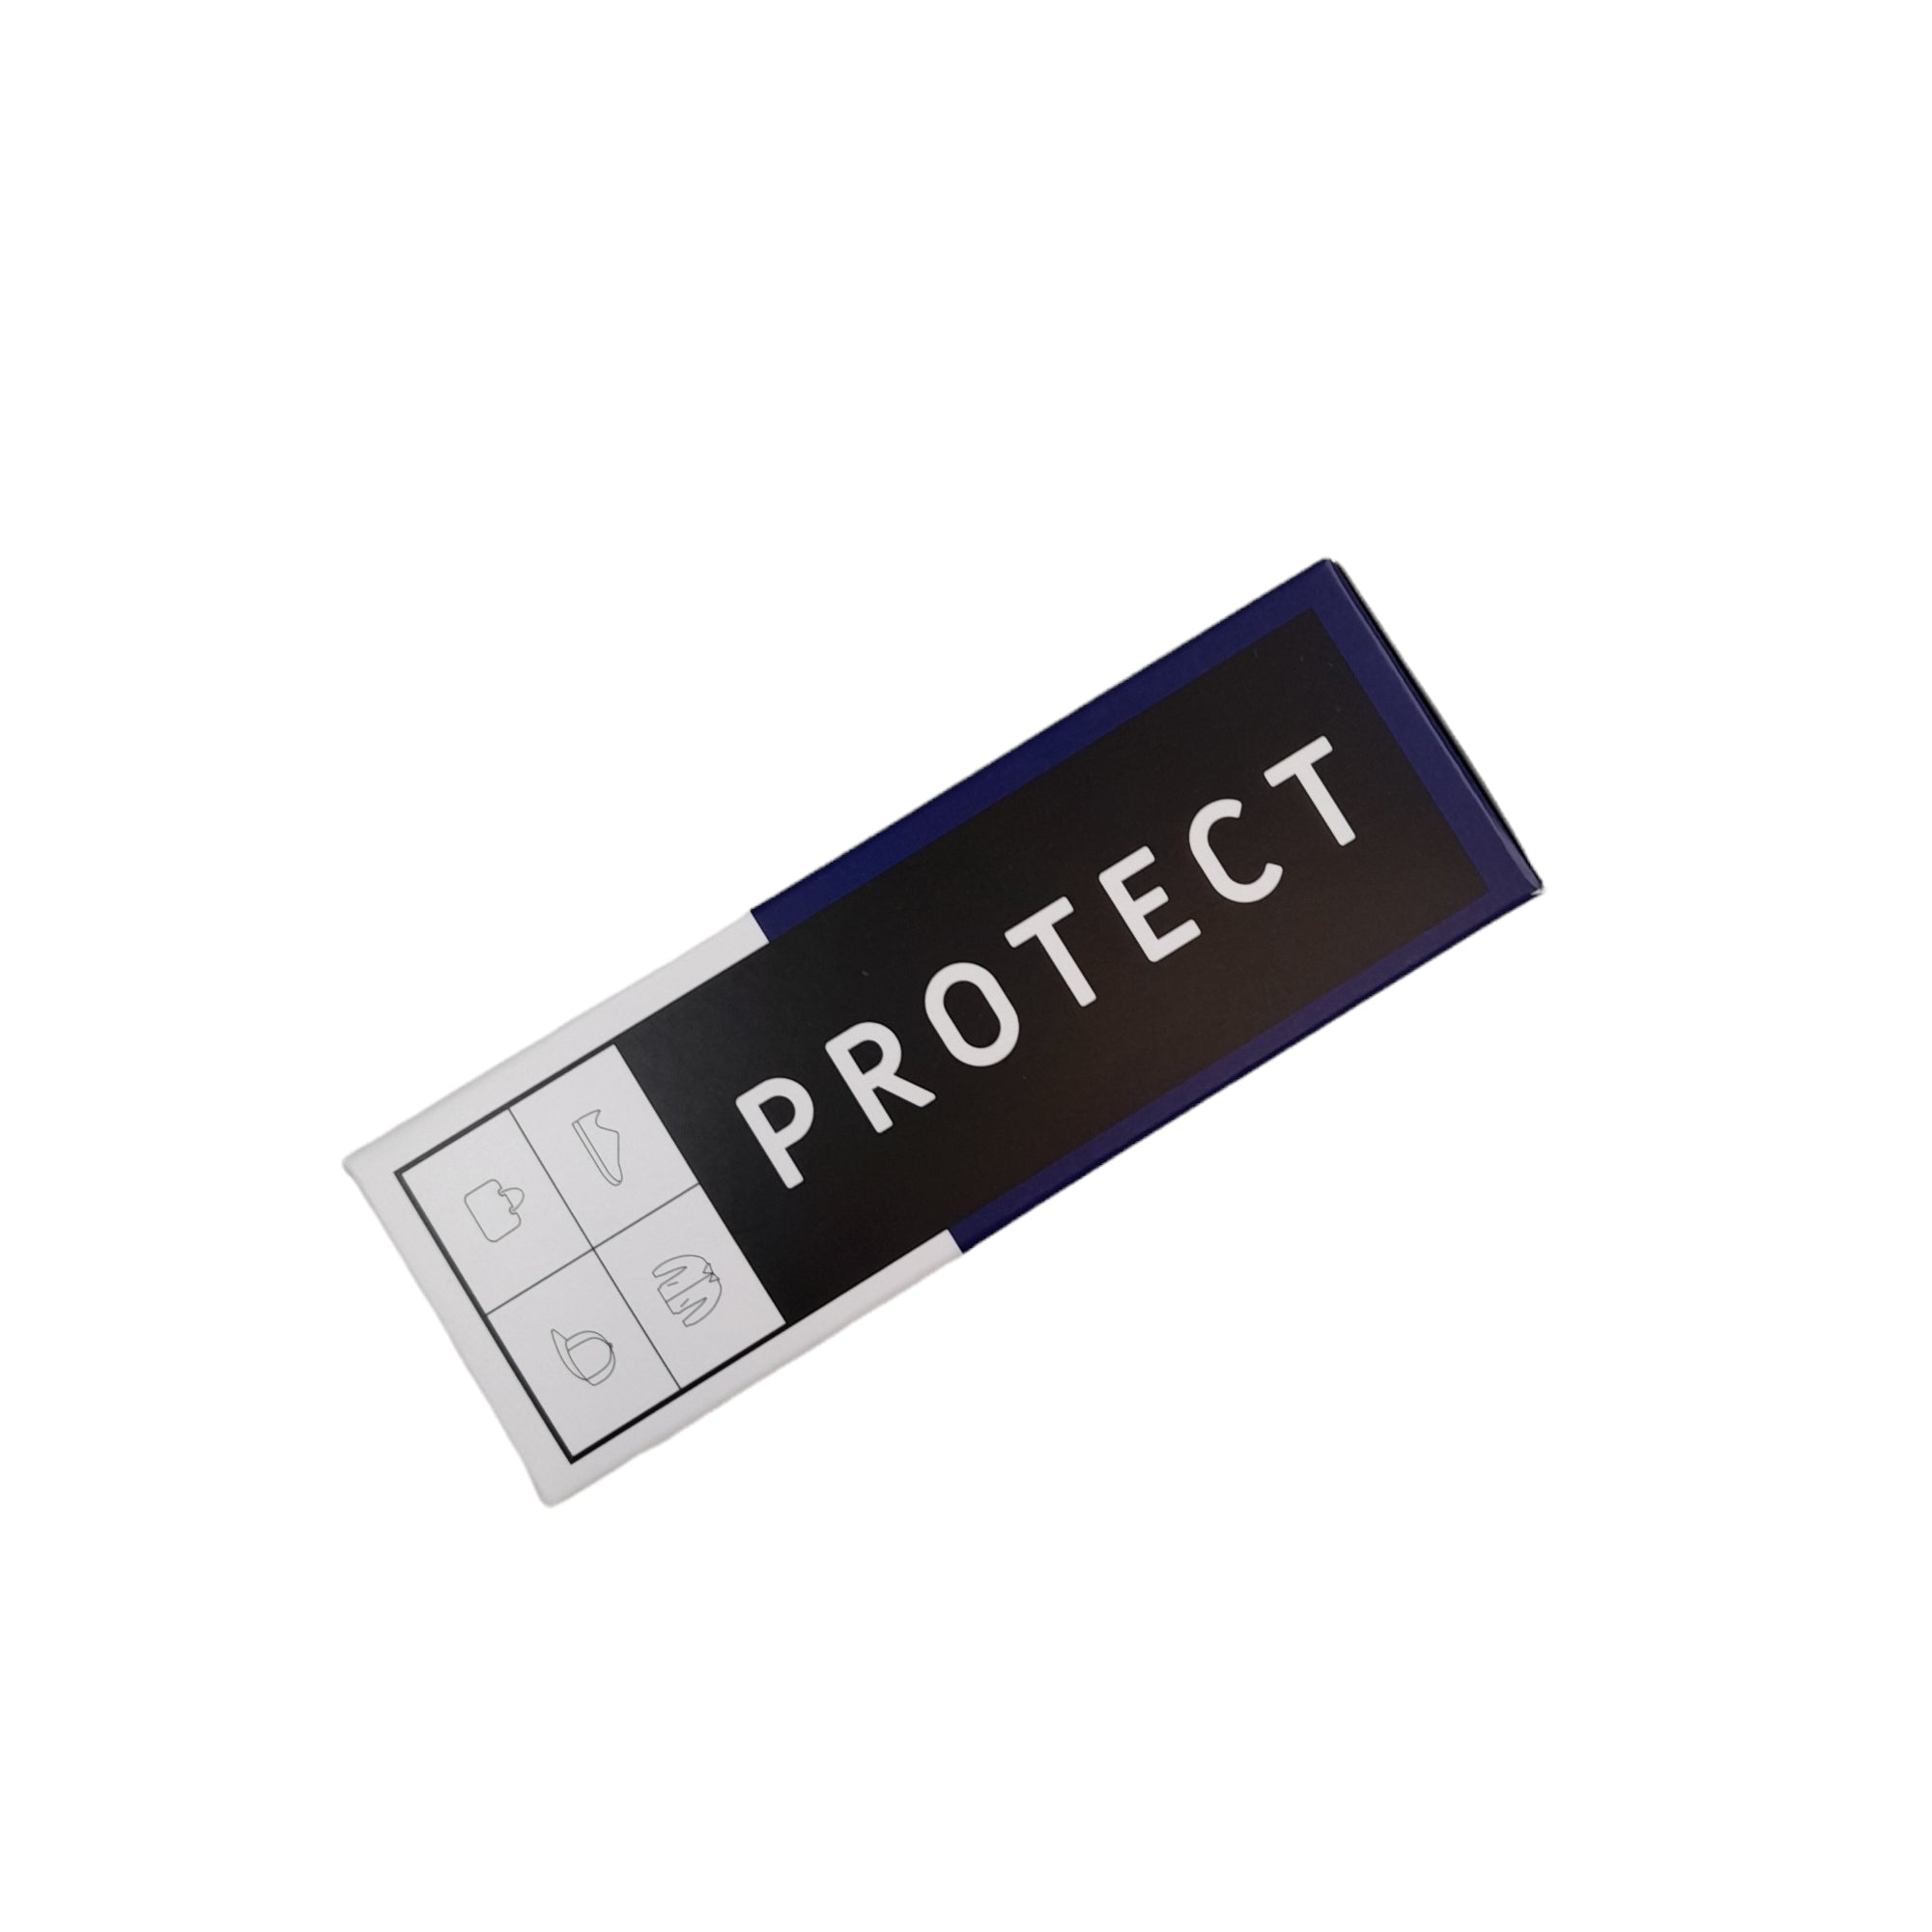 Protector - shoe&me - Liquiproof LABS - Accessories/Products - Accessories/Products